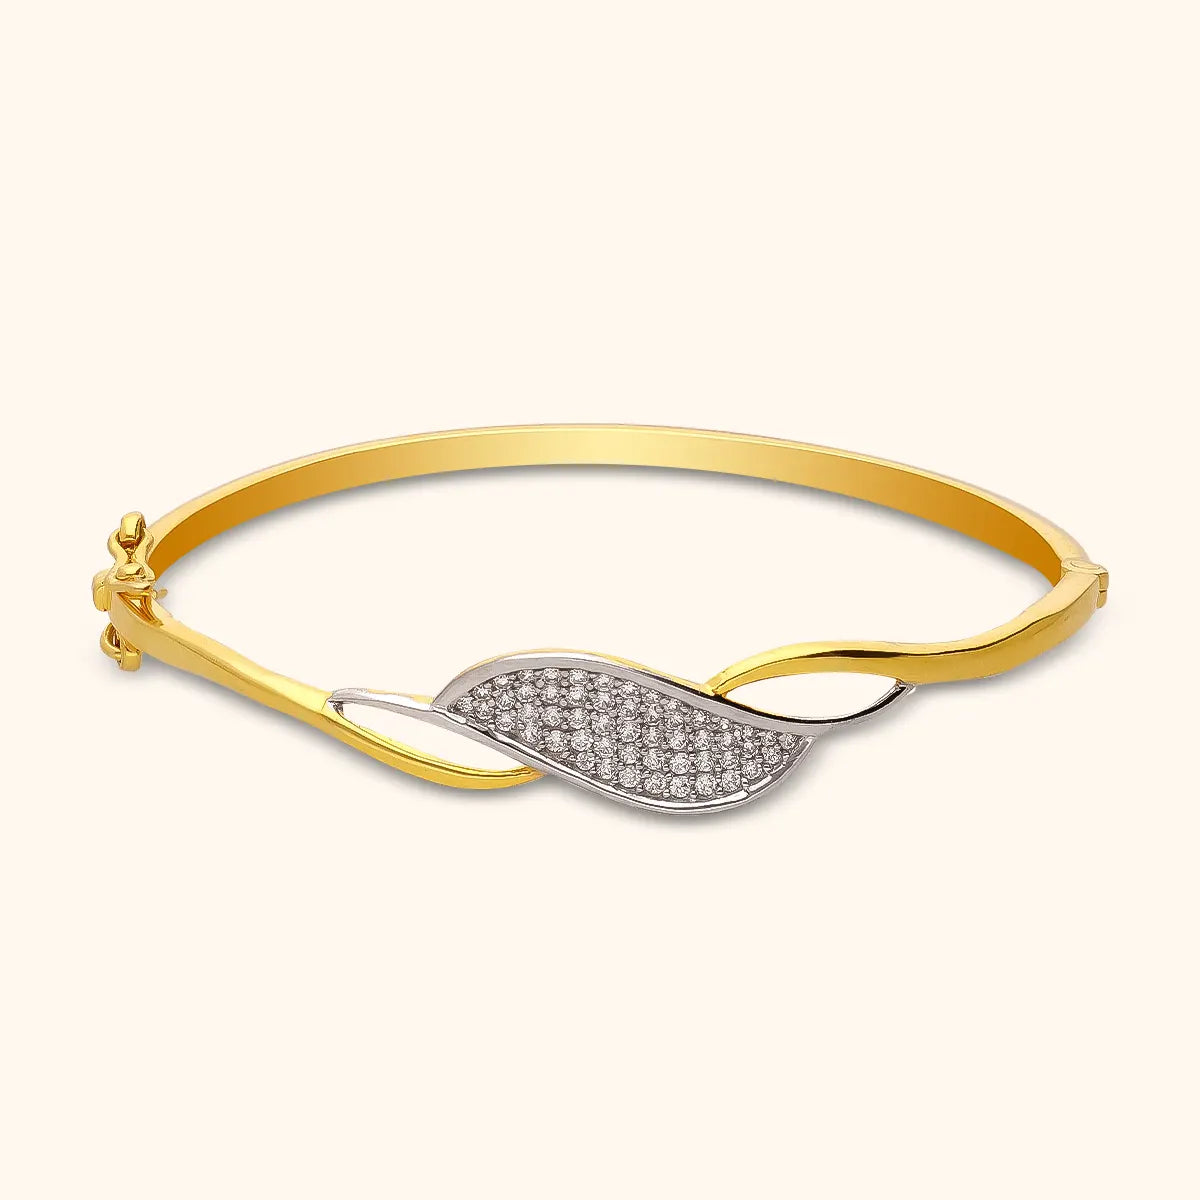 Must-Have Link Chain Bracelets for Women